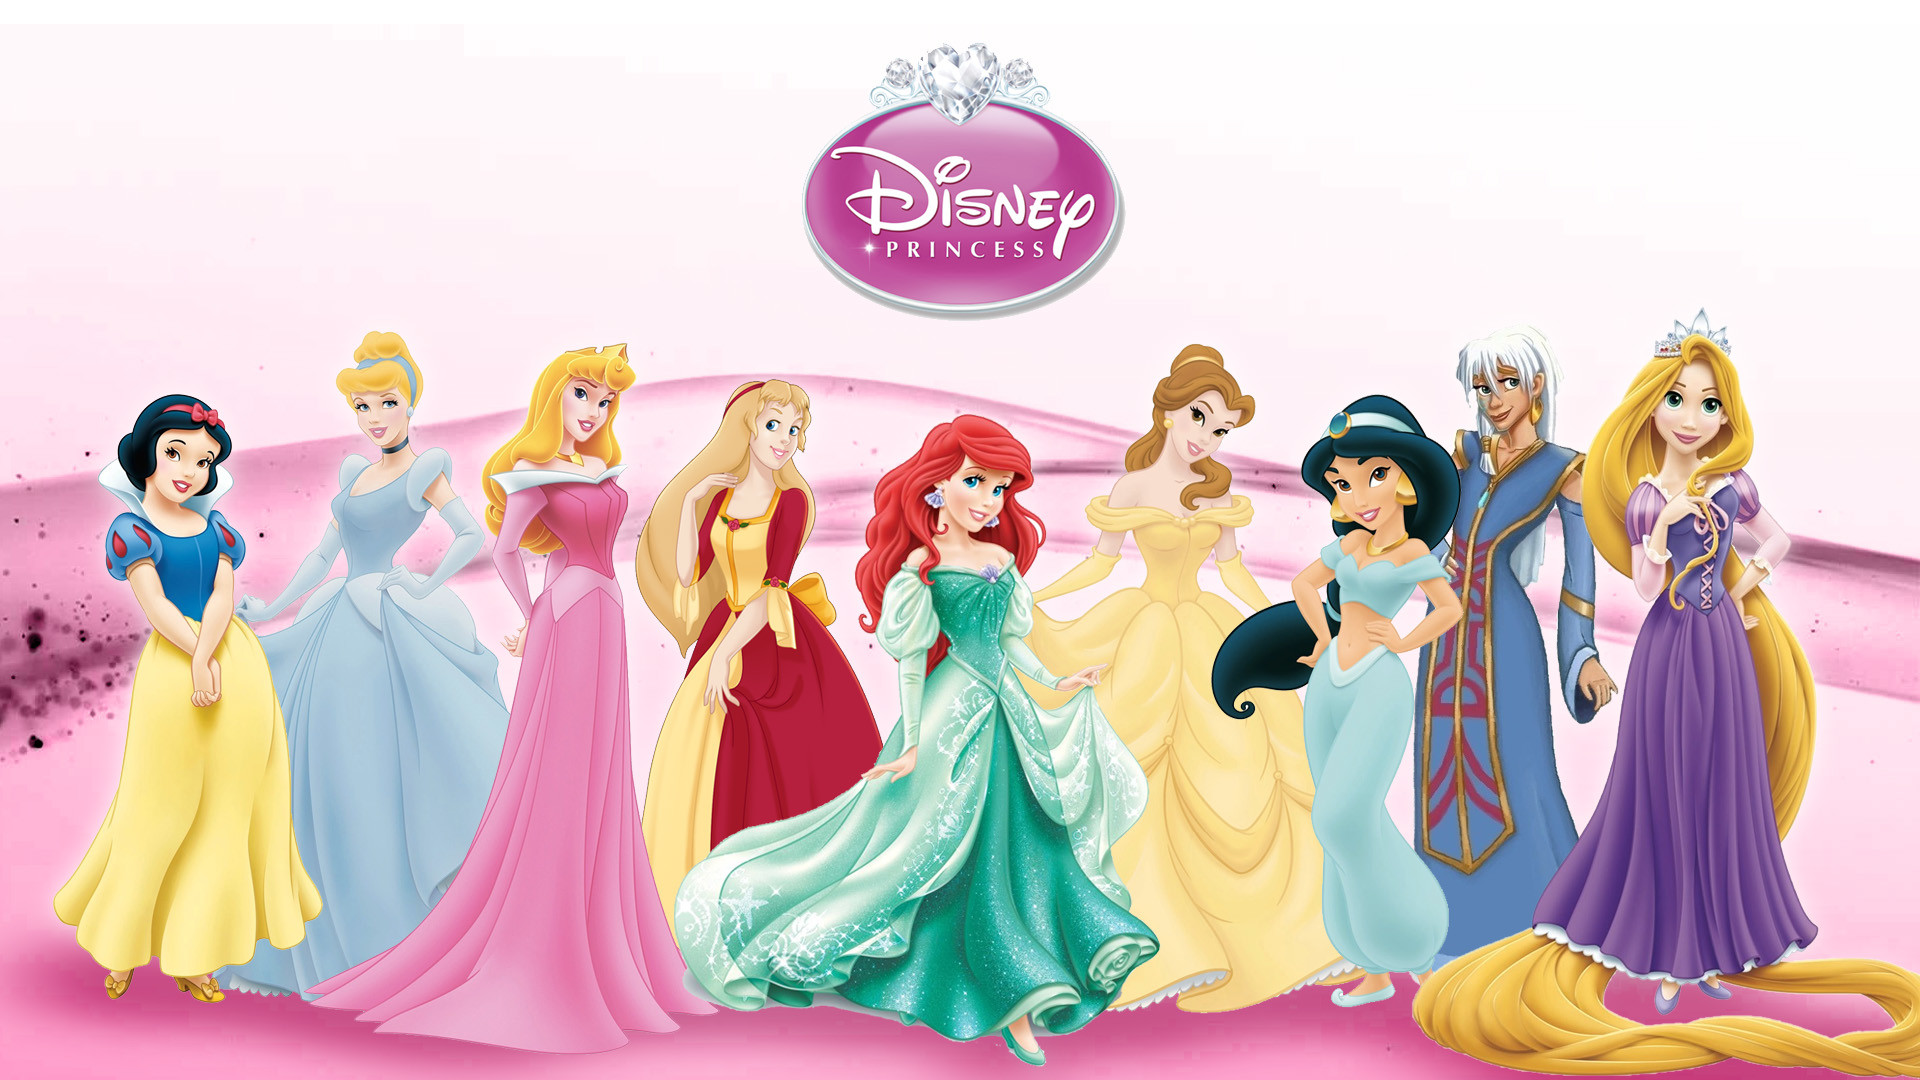 1920x1080 ... 8 Disney Princesses HD Wallpapers | Backgrounds - Wallpaper Abyss ...